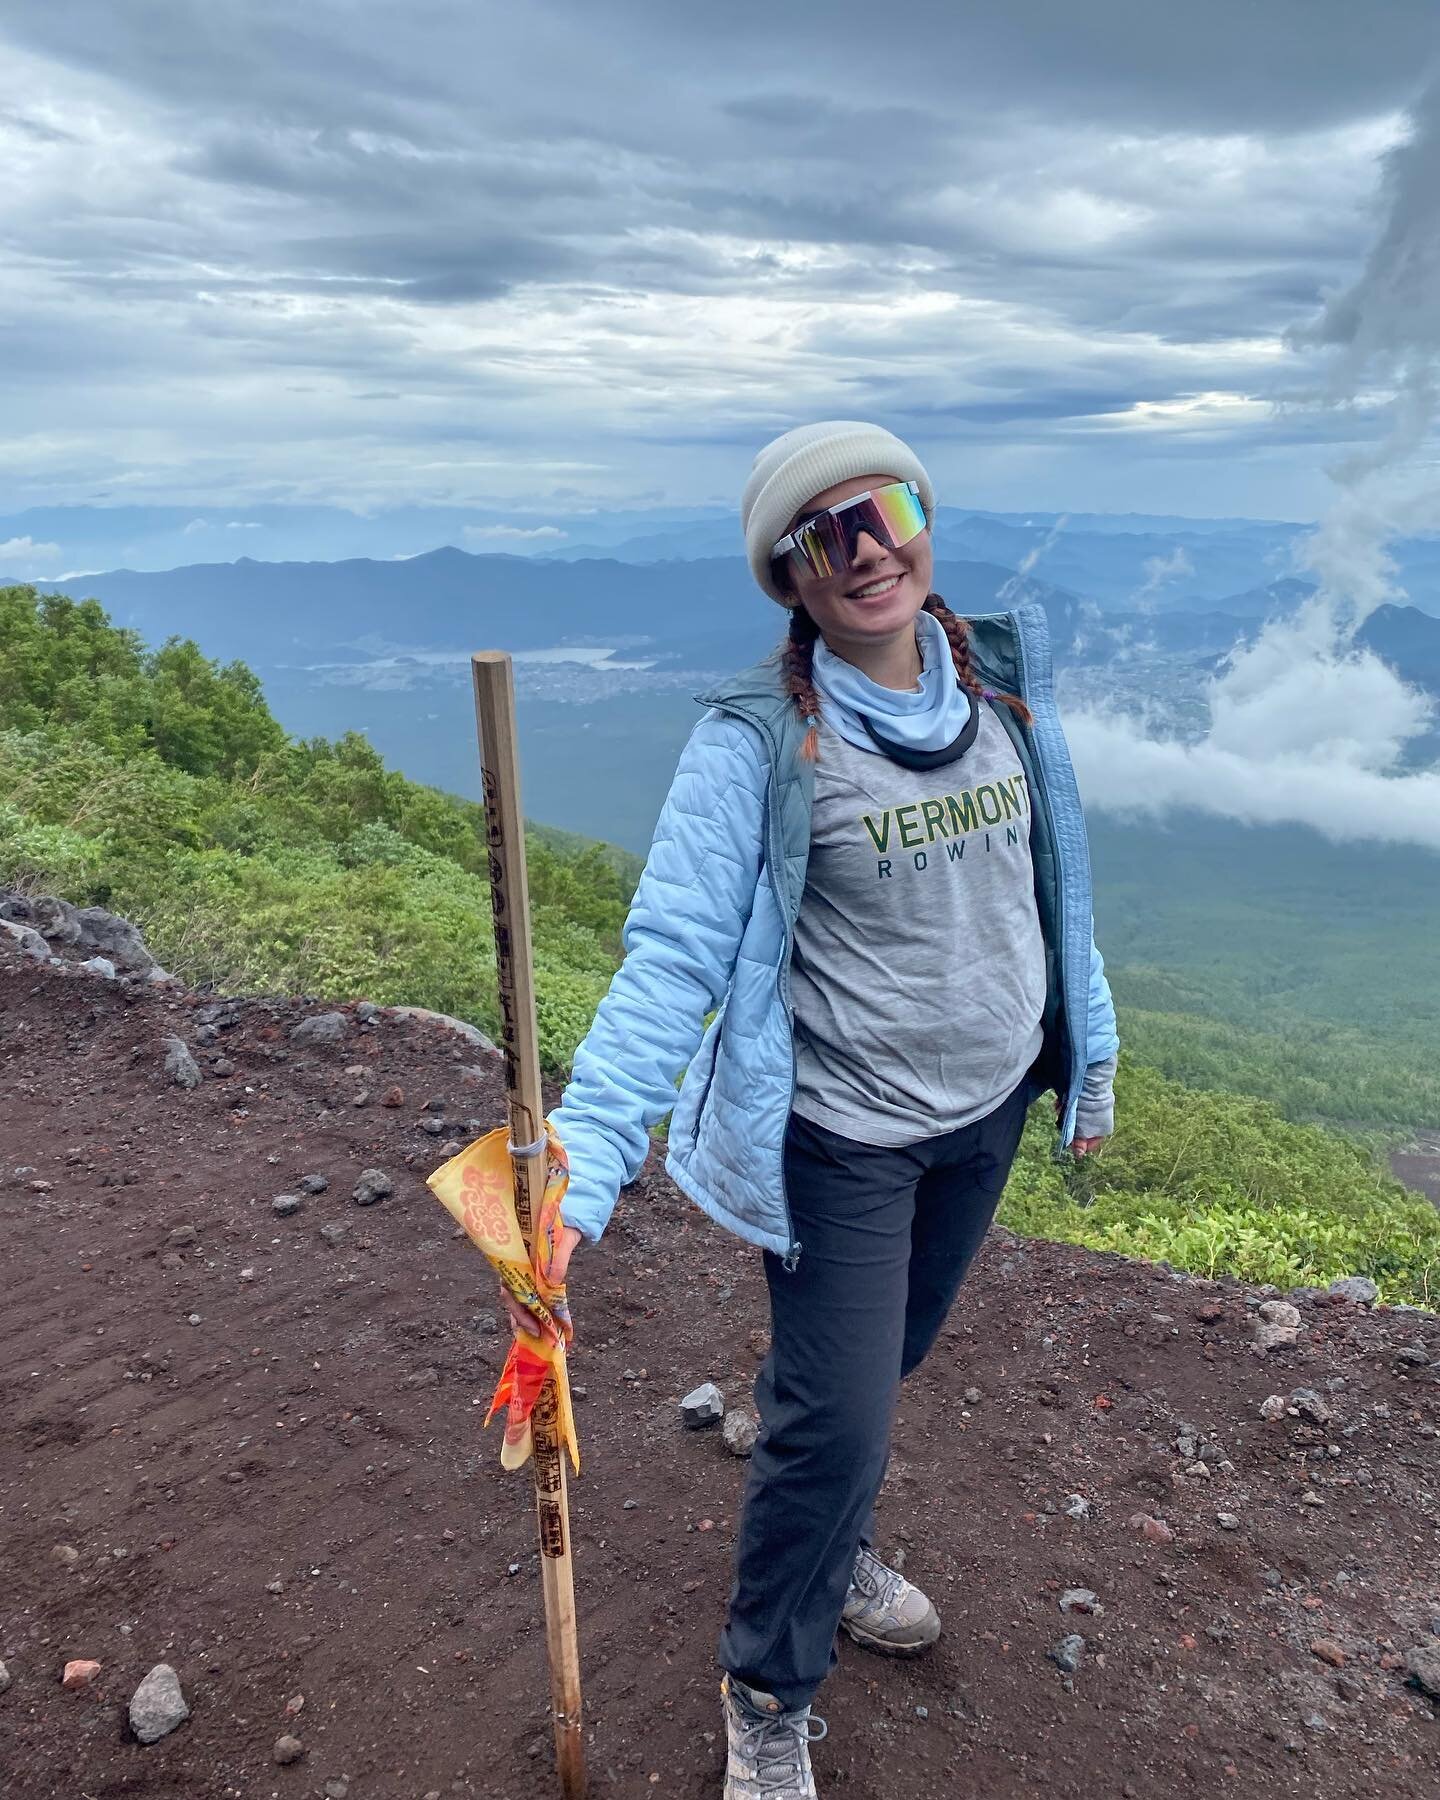 What is VTR doing this summer?

This summer on a trip to Japan, Mia Sorongon &lsquo;25 hiked Mt. Fuji in Vermont Rowing gear, of course. Way to go, Mia! Keep a lookout for more of what our rowers and coxes have been up to!